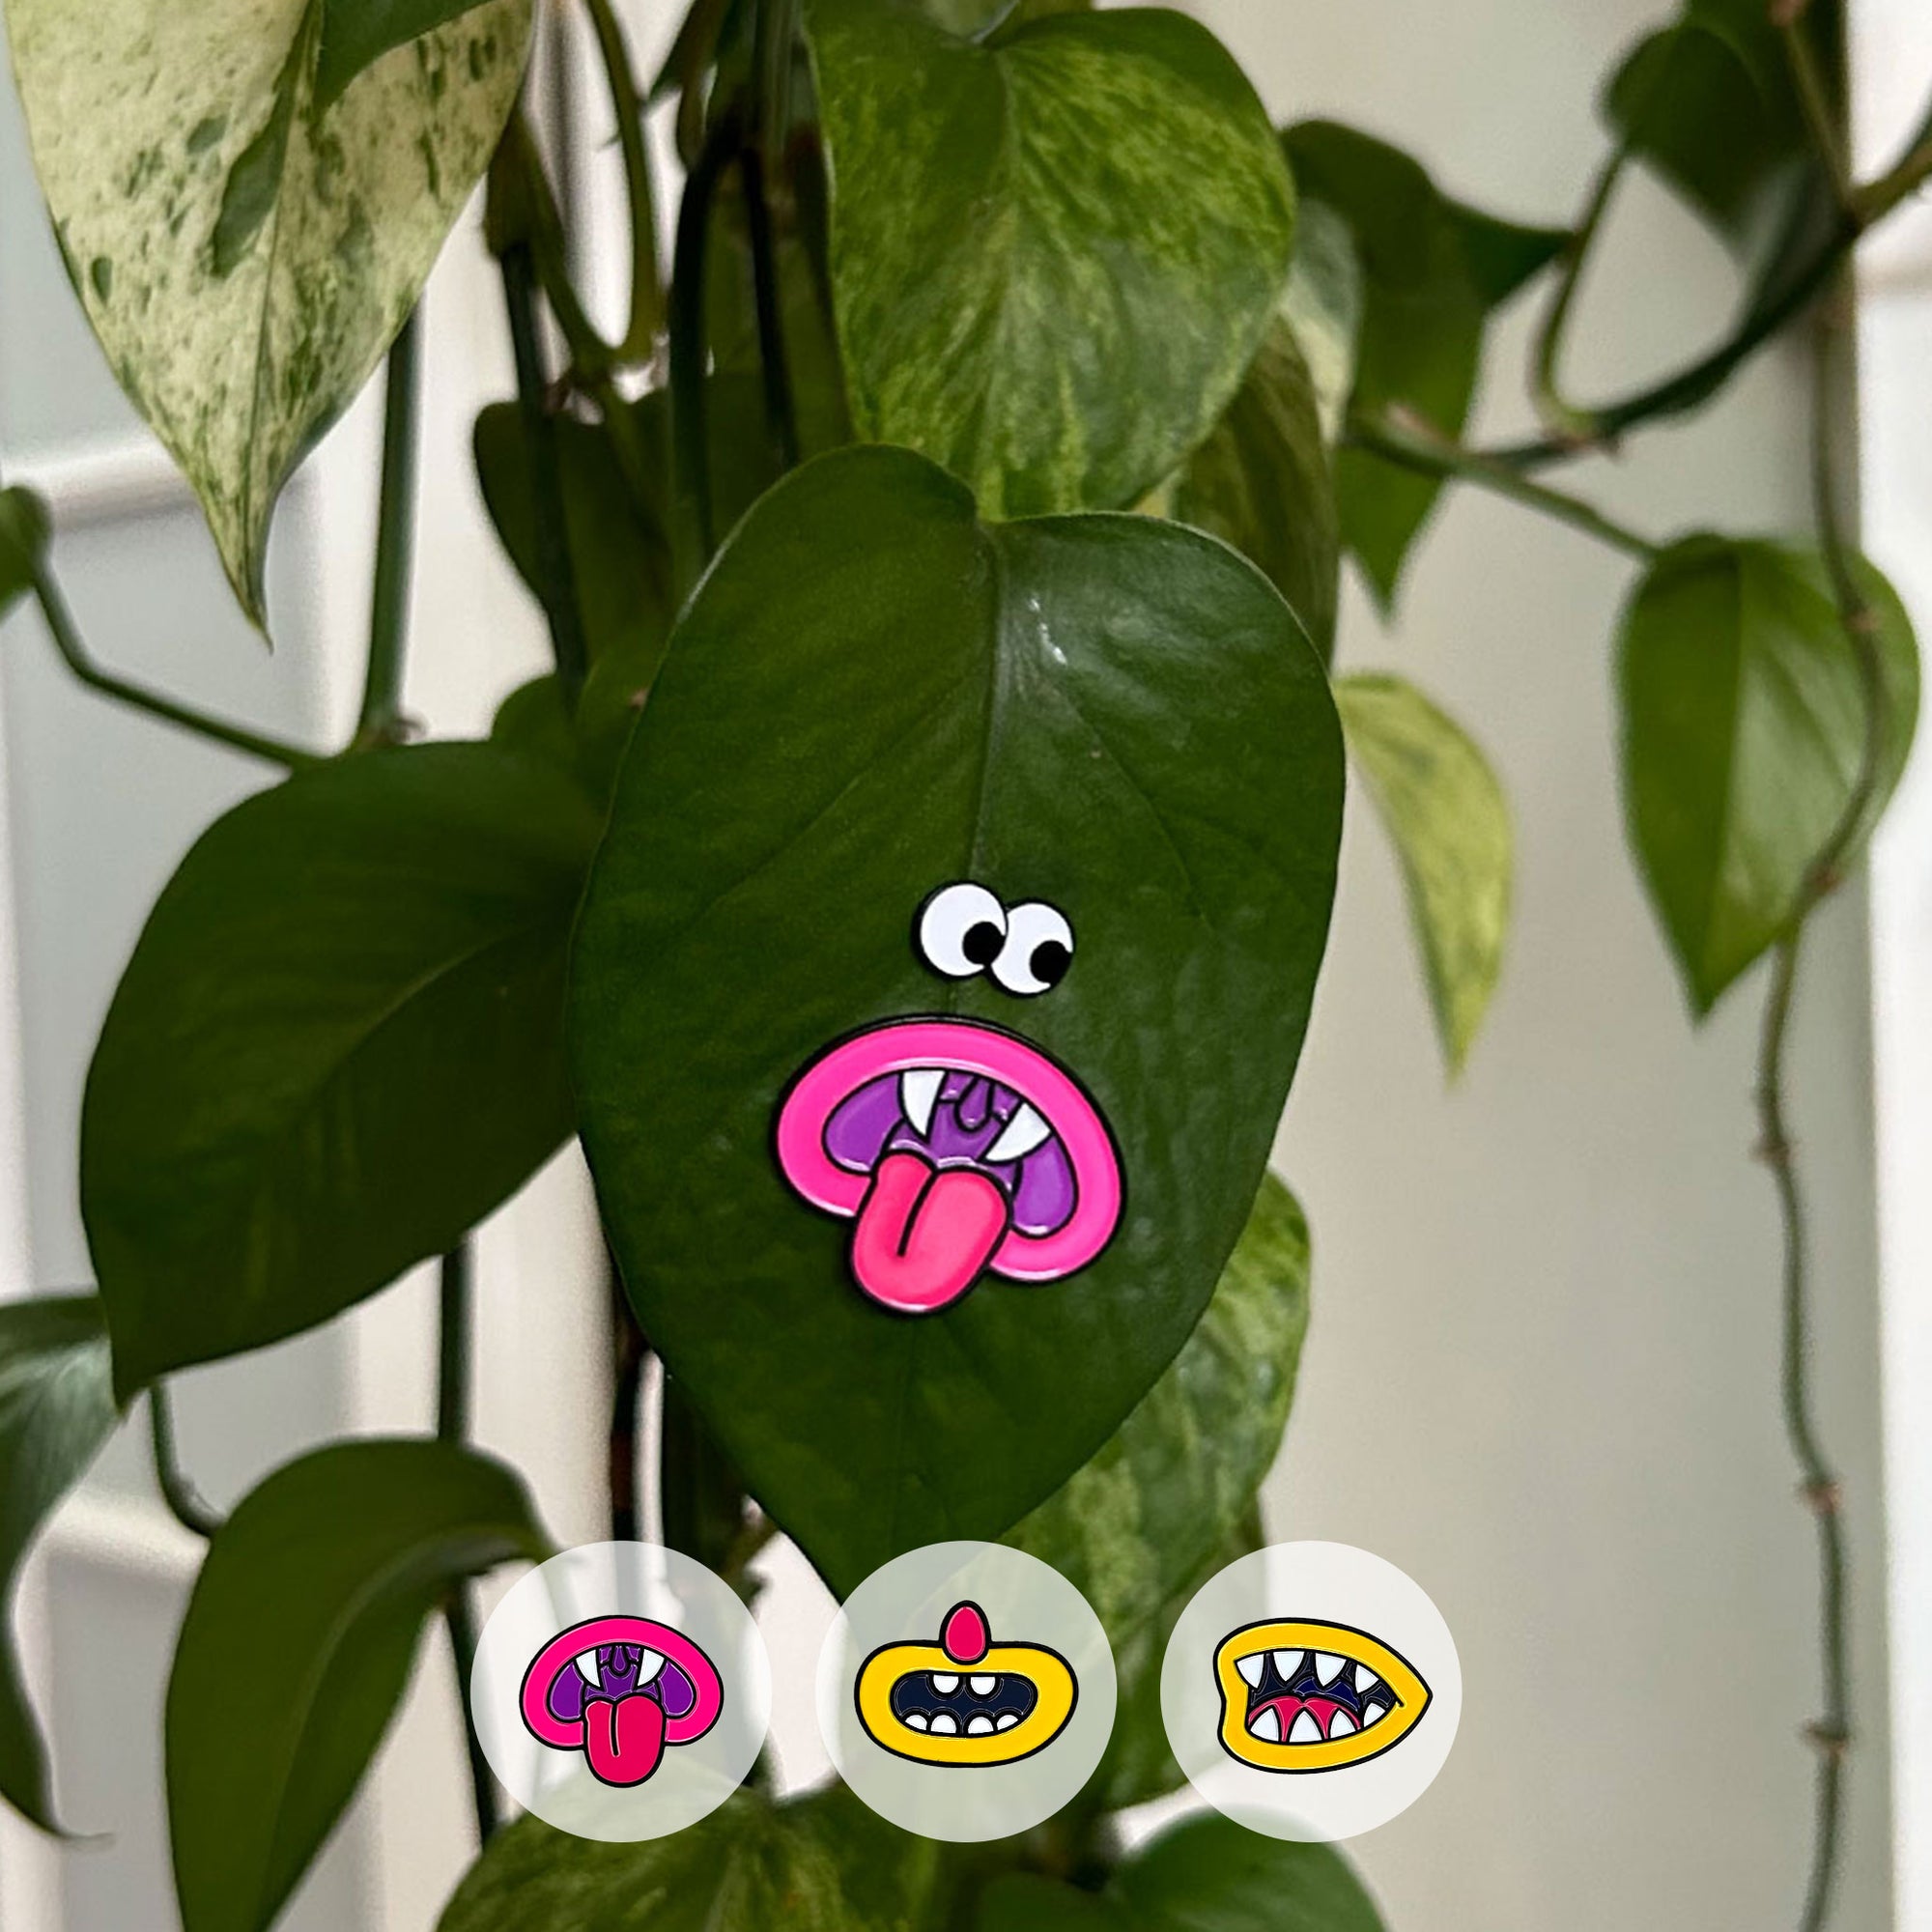  6 Pcs Funny Plant Magnets Decor, Cute Plant Magnet Gift for  Potted Plants, Unique Gifts for Plant Lovers, Perfect Plants Accessories -  Add Personality to Plants and Make You Smile Live 